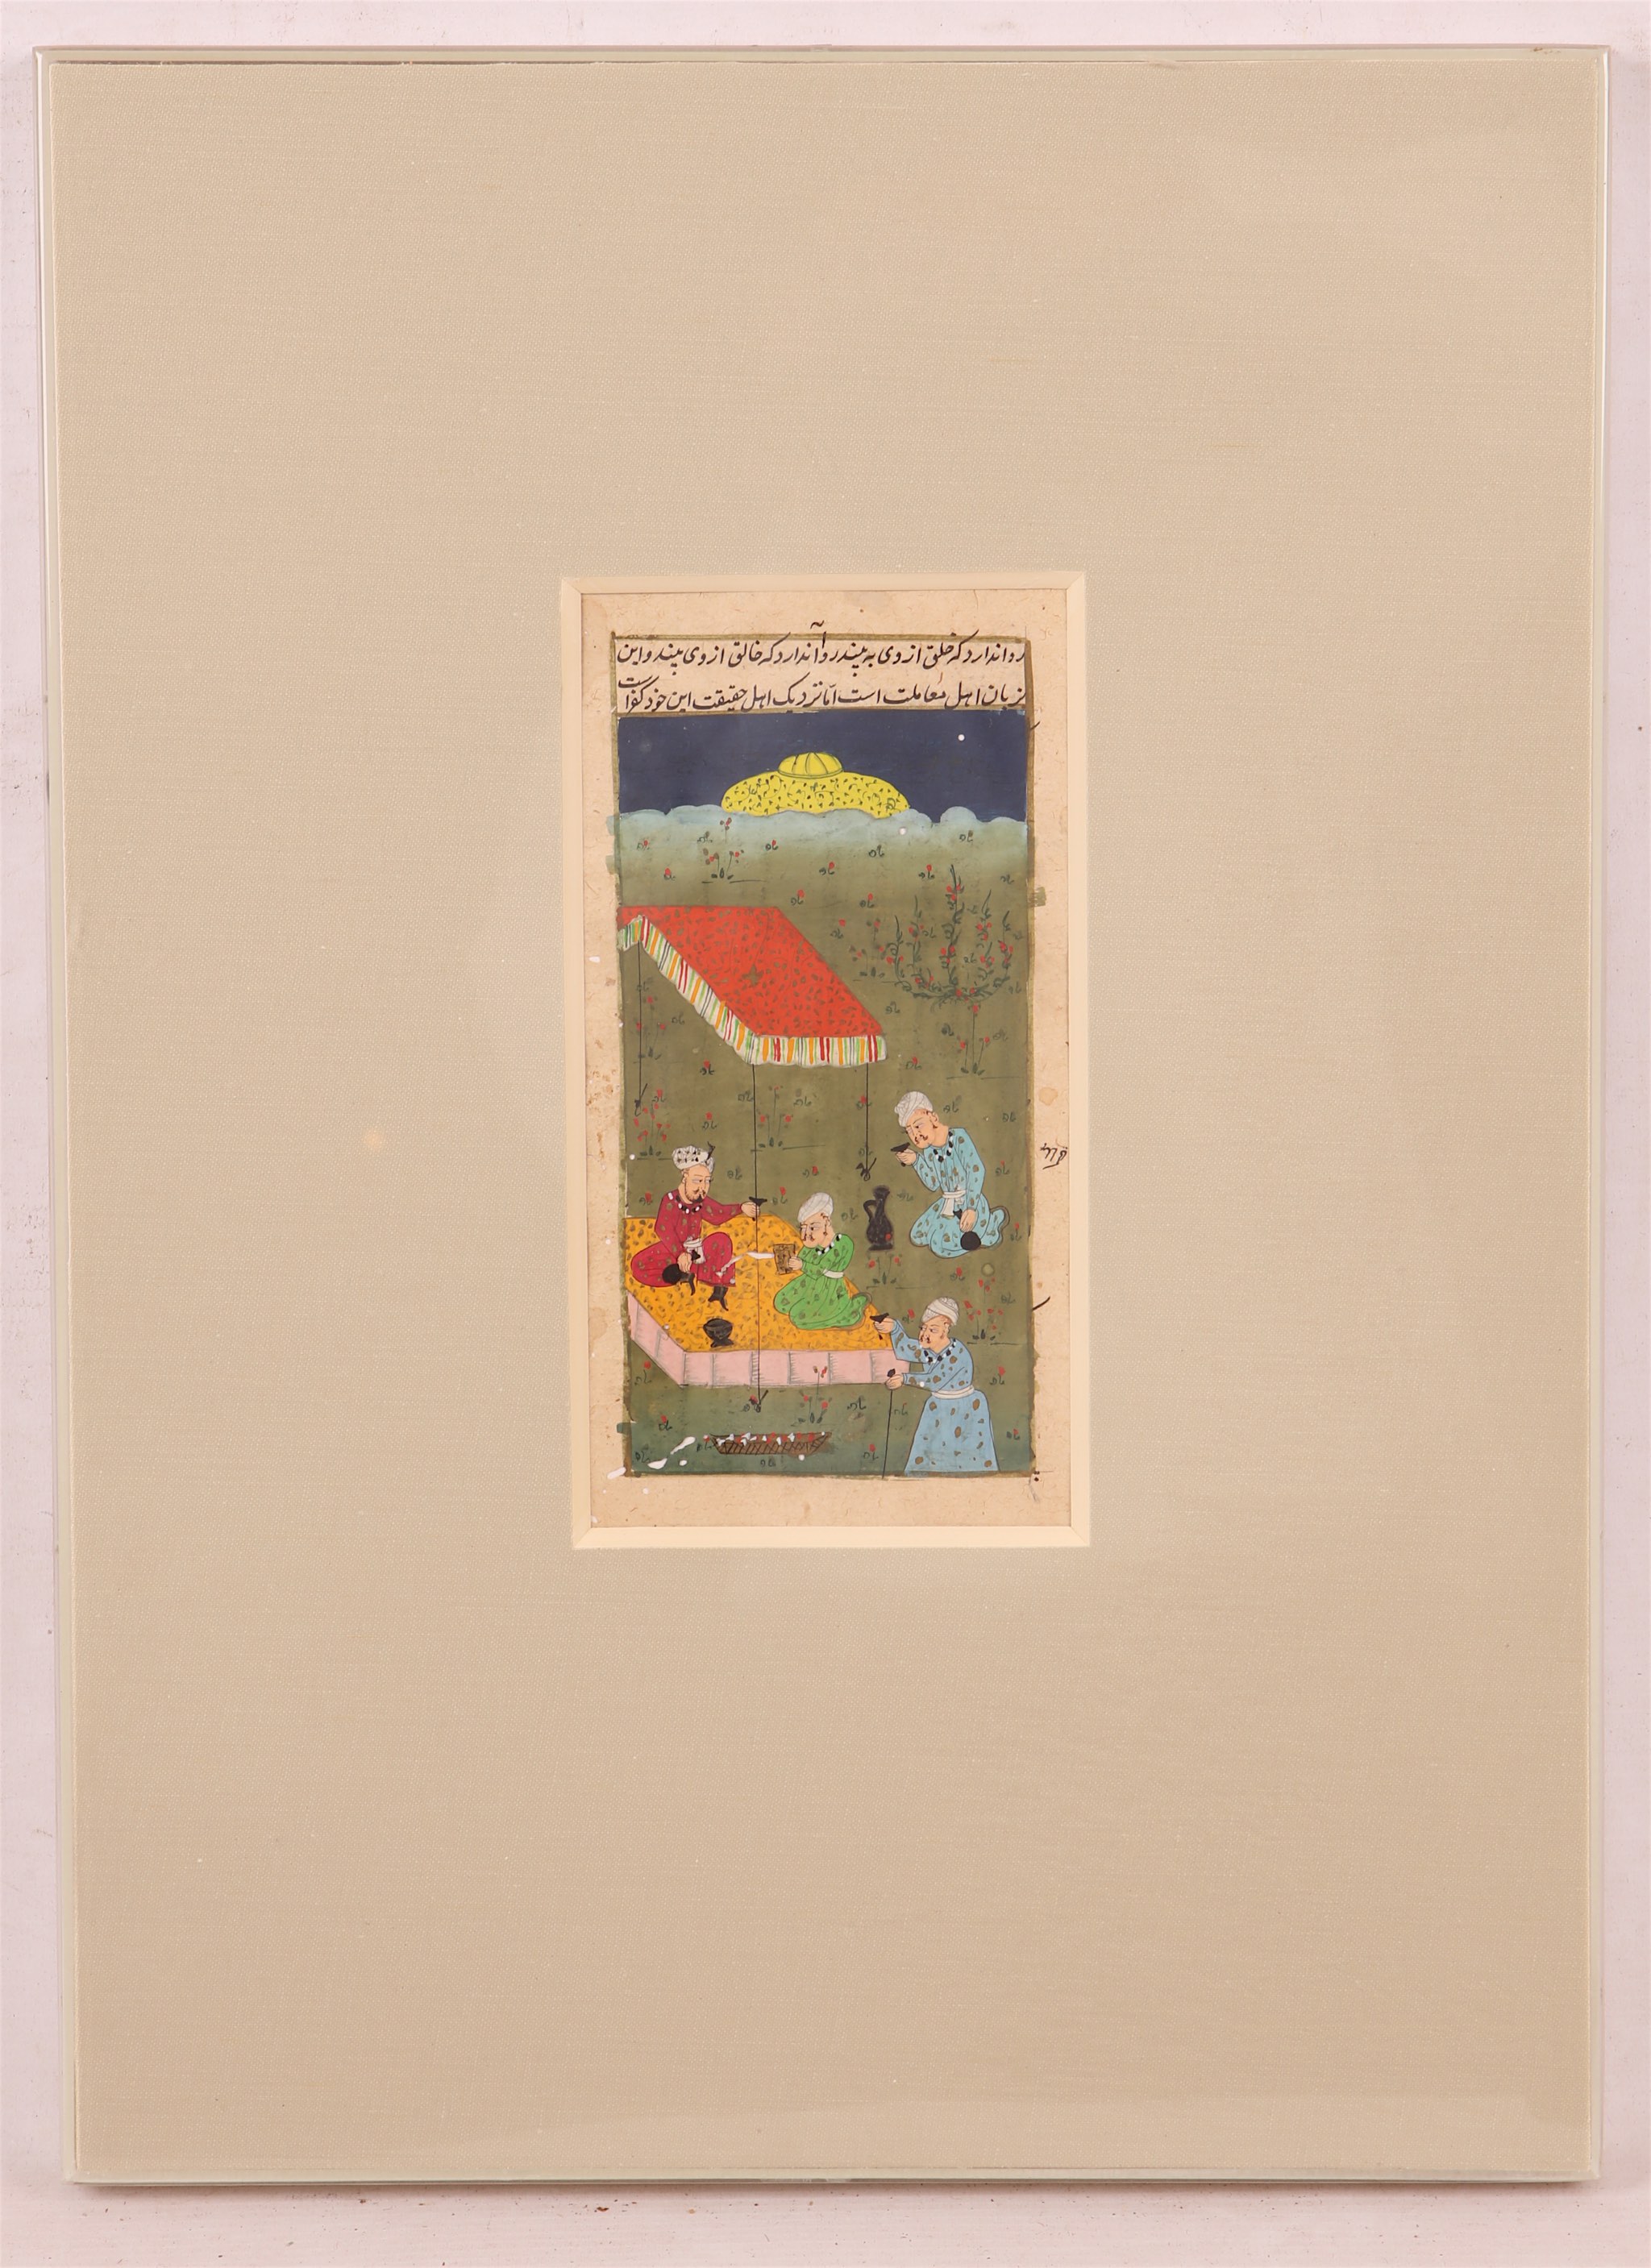 Four 19th century hand painted Indian pictures, studies of Elephant on a Tiger hunt, practice with - Image 5 of 8